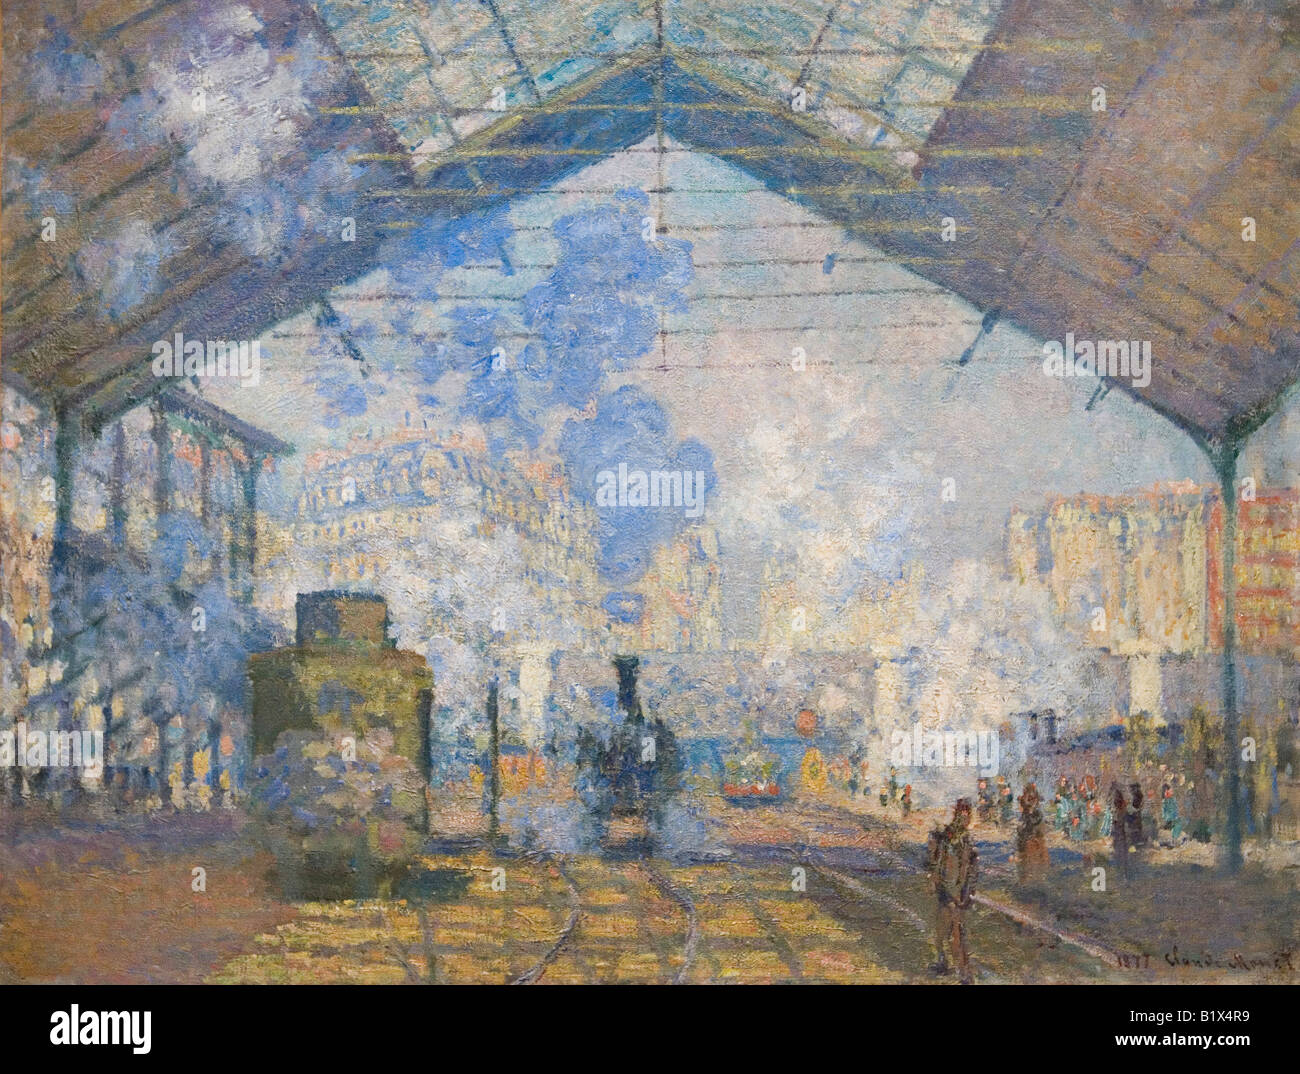 Saint Lazare Railway Station by Claude Monet Oil on canvas 1877 Musee D'Orsay D Orsay Art Gallery and Museum Paris France Stock Photo